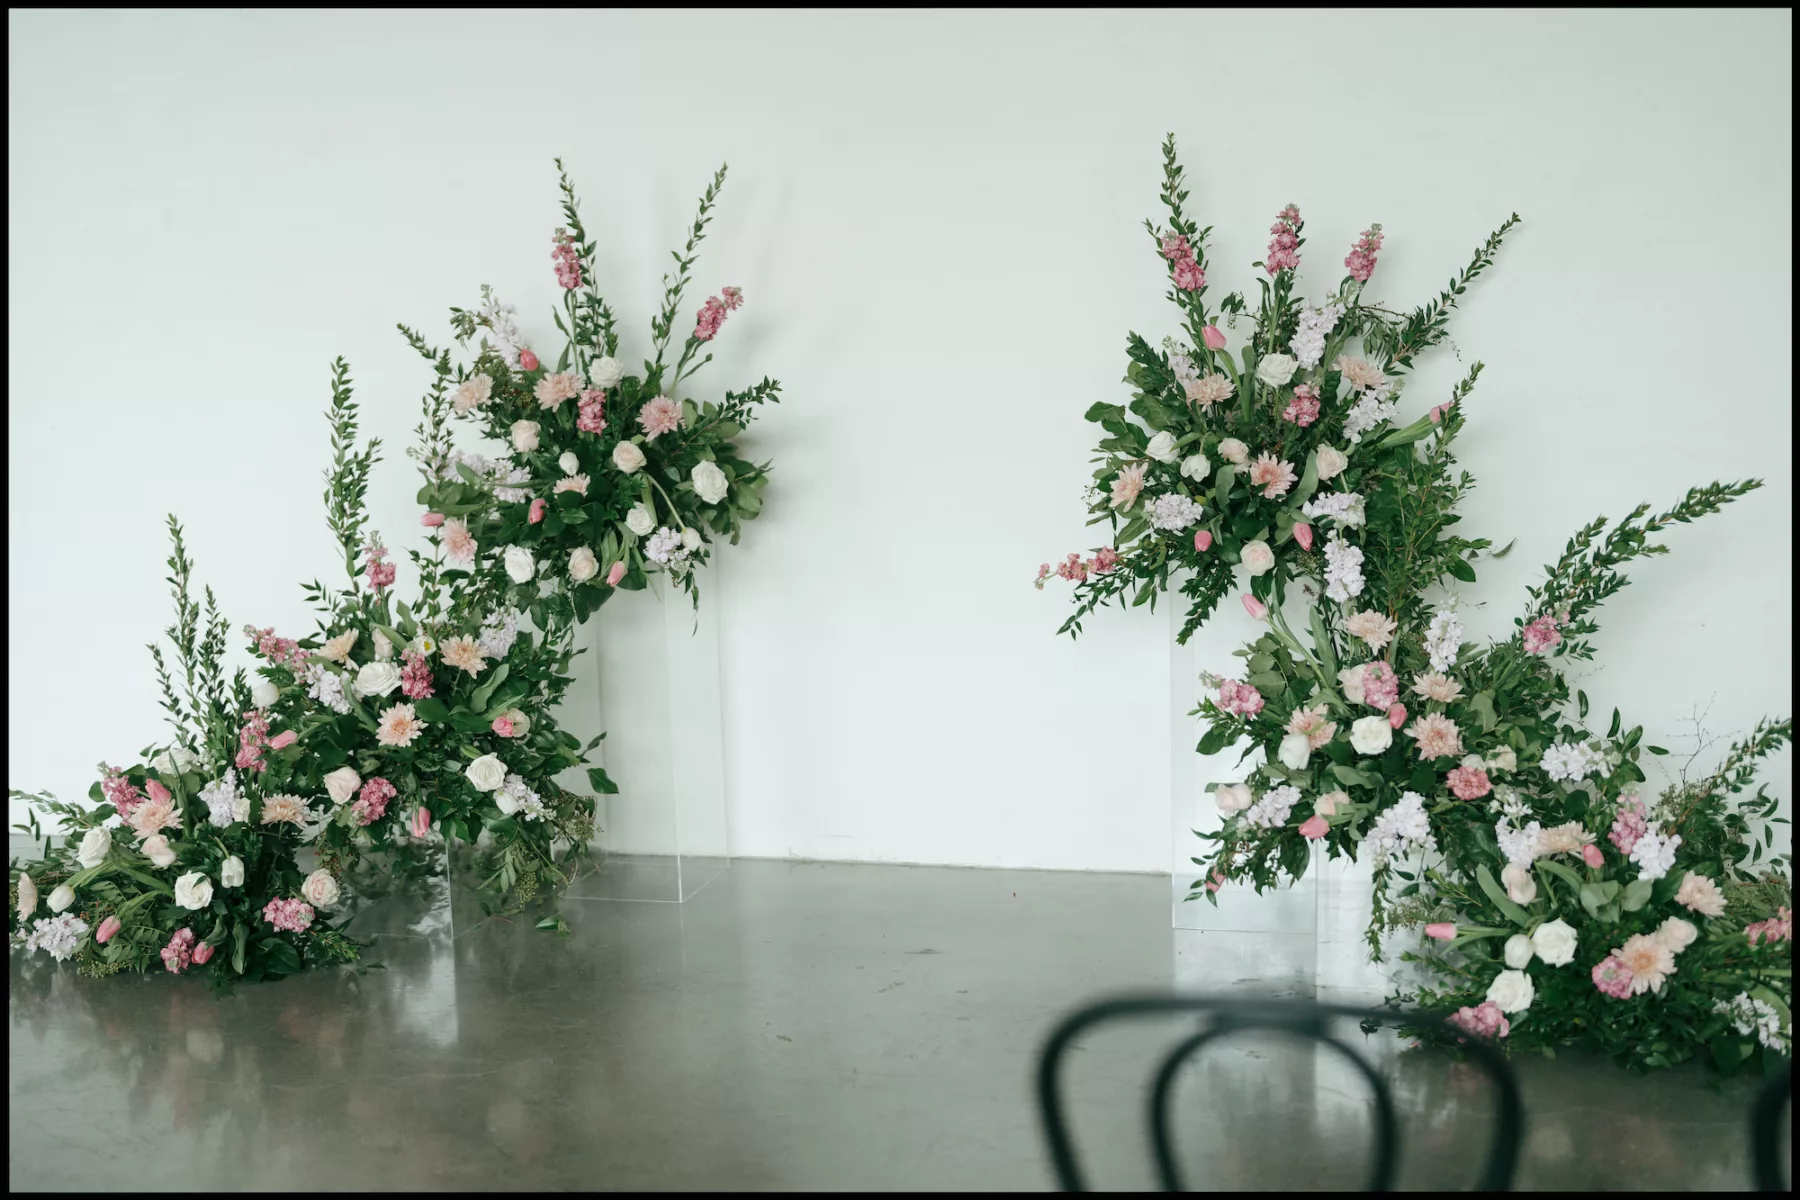 Whimsical Pink and White Roses, Chrysanthemums, Tulips, and Greenery Floral Arrangement Wedding Ceremony Backdrop Inspiration | Tampa Bay Florist Save The Date Florida